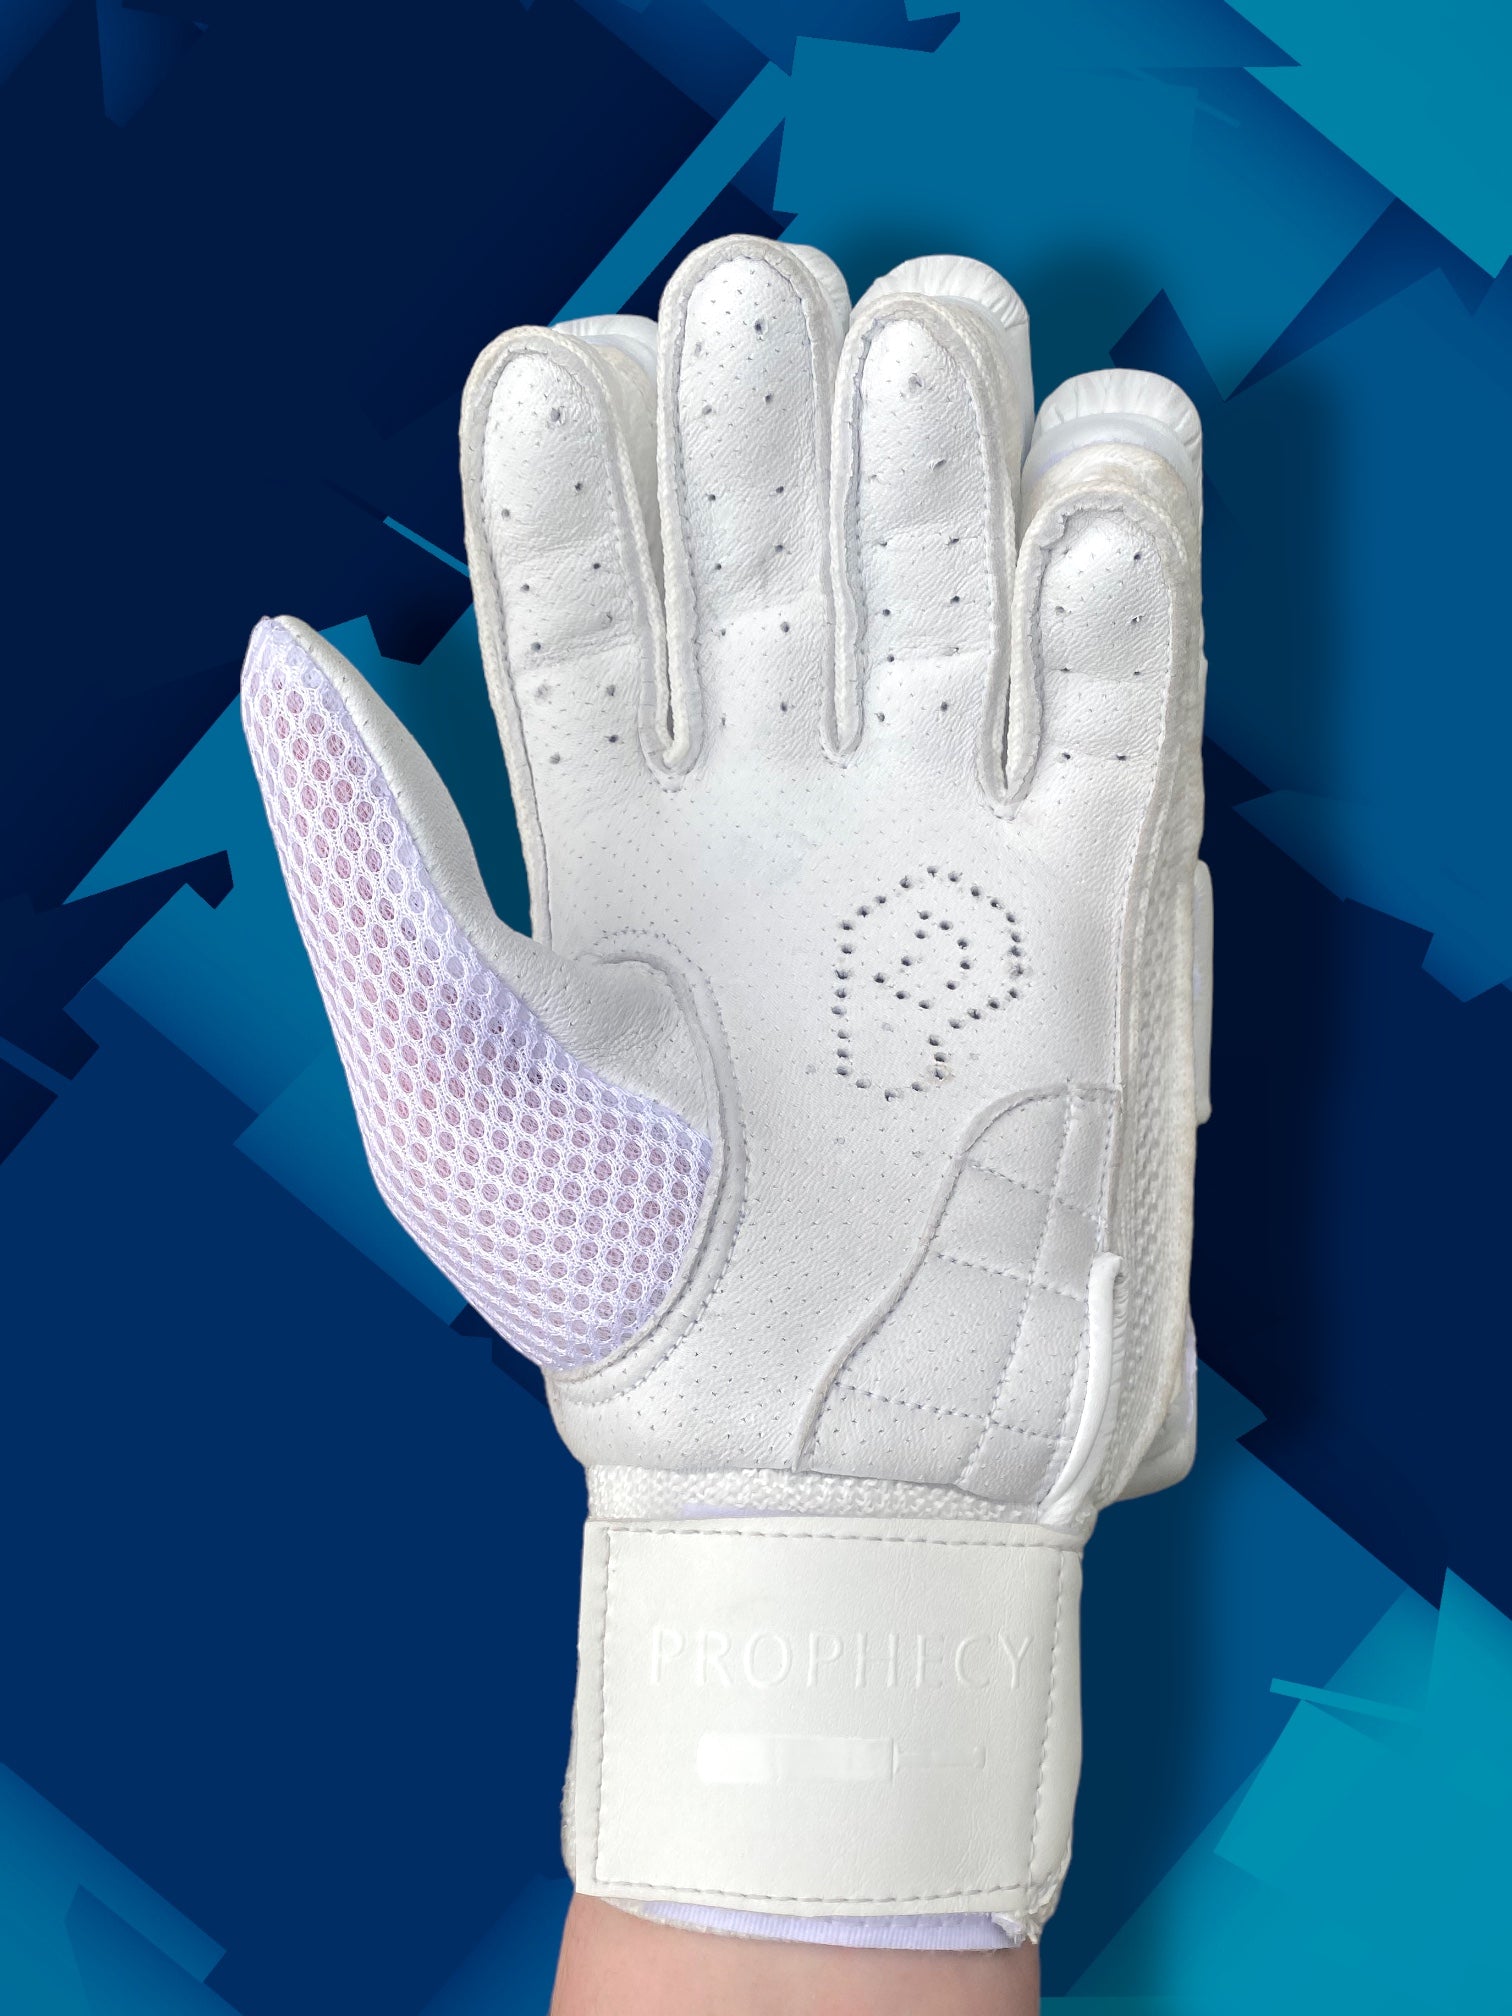 Prophecy Cricket Gloves